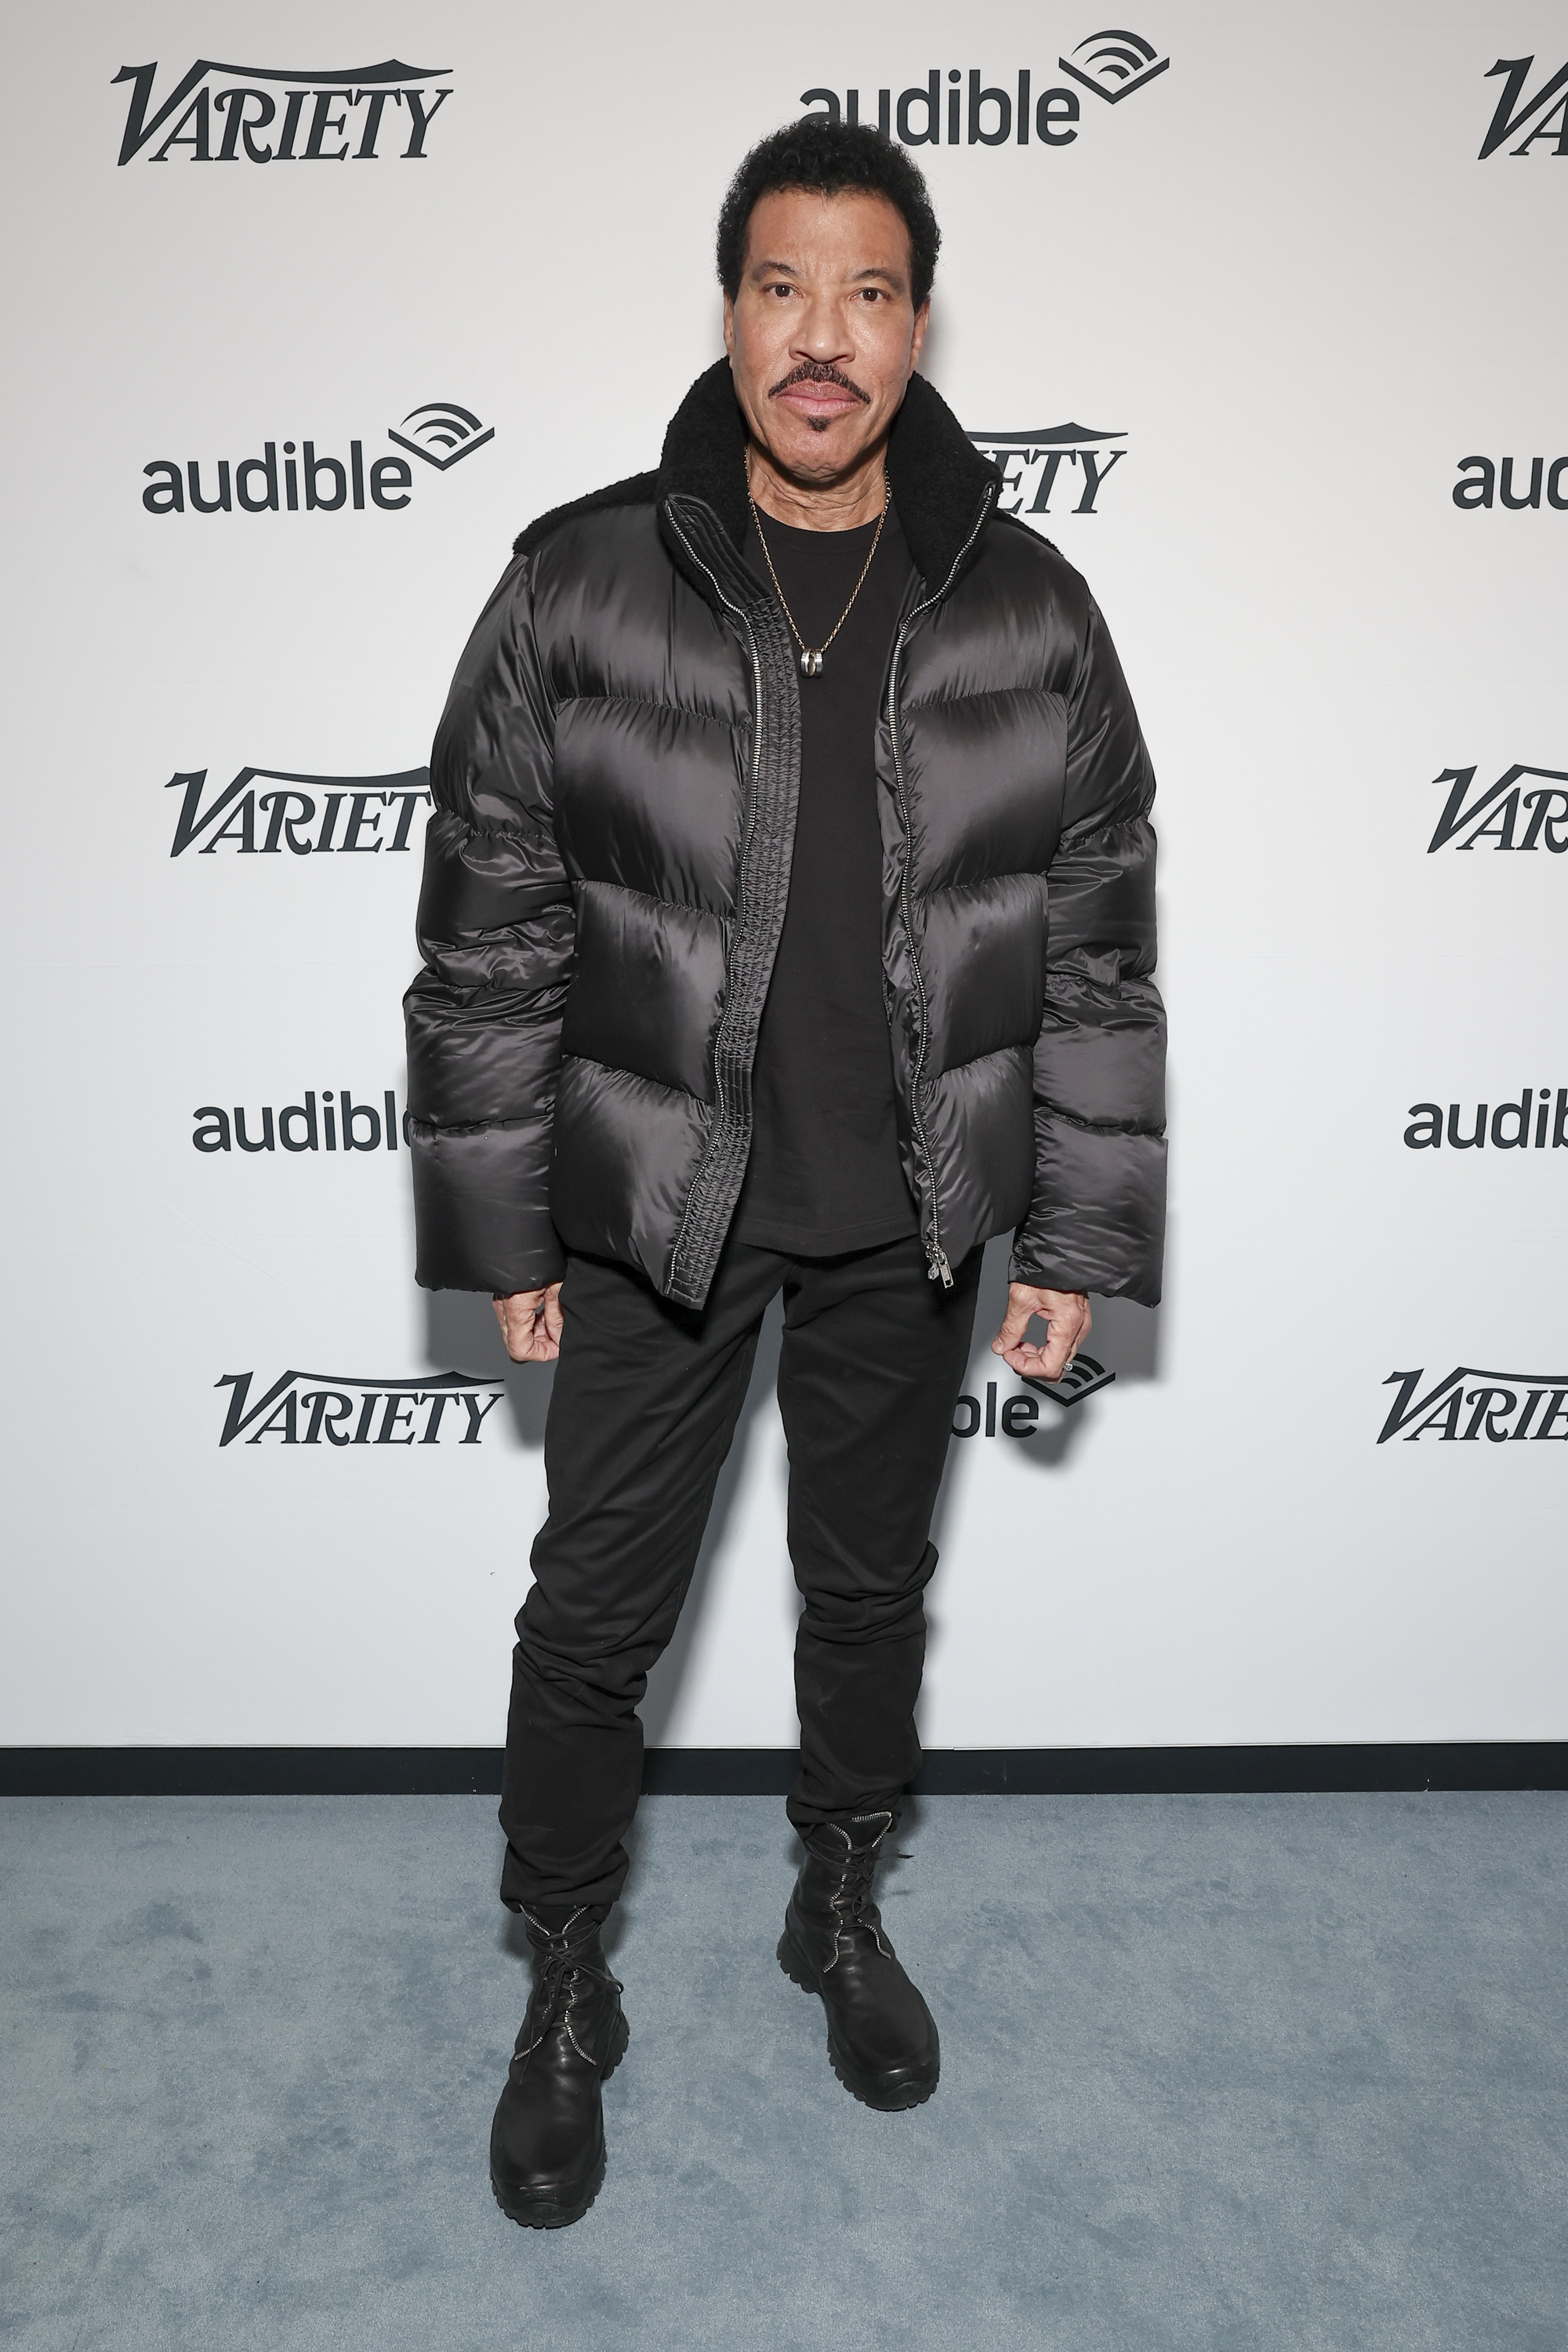 Lionel Richie at the Variety Sundance Studio, Presented by Audible in Park City, Utah, on January 19, 2024. | Source: Getty Images